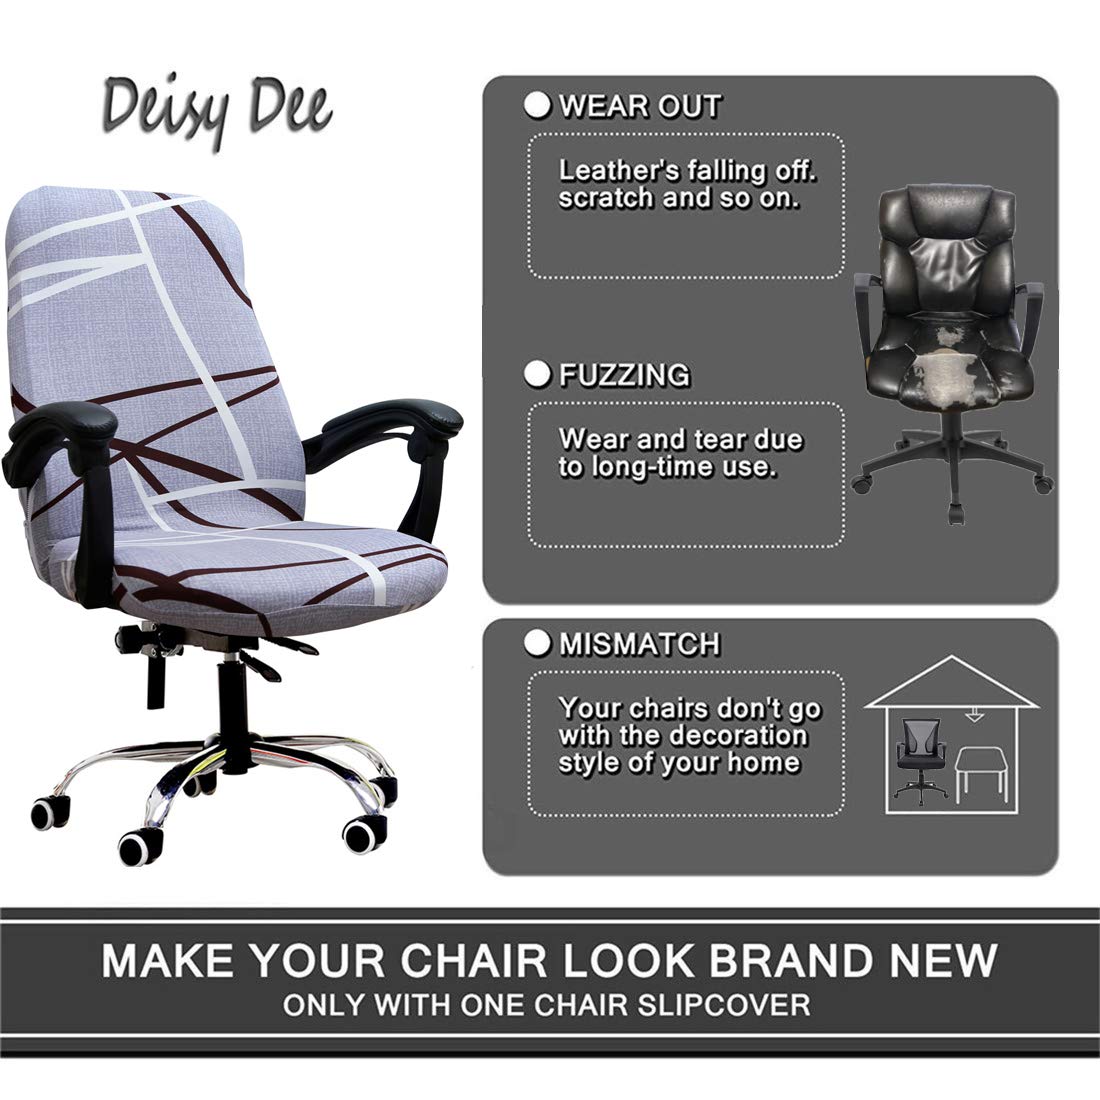 Deisy Dee Computer Office Chair Covers For Stretch Rotating Mid Back Chair Slipcovers Cover Only Chair Covers C162 (F)